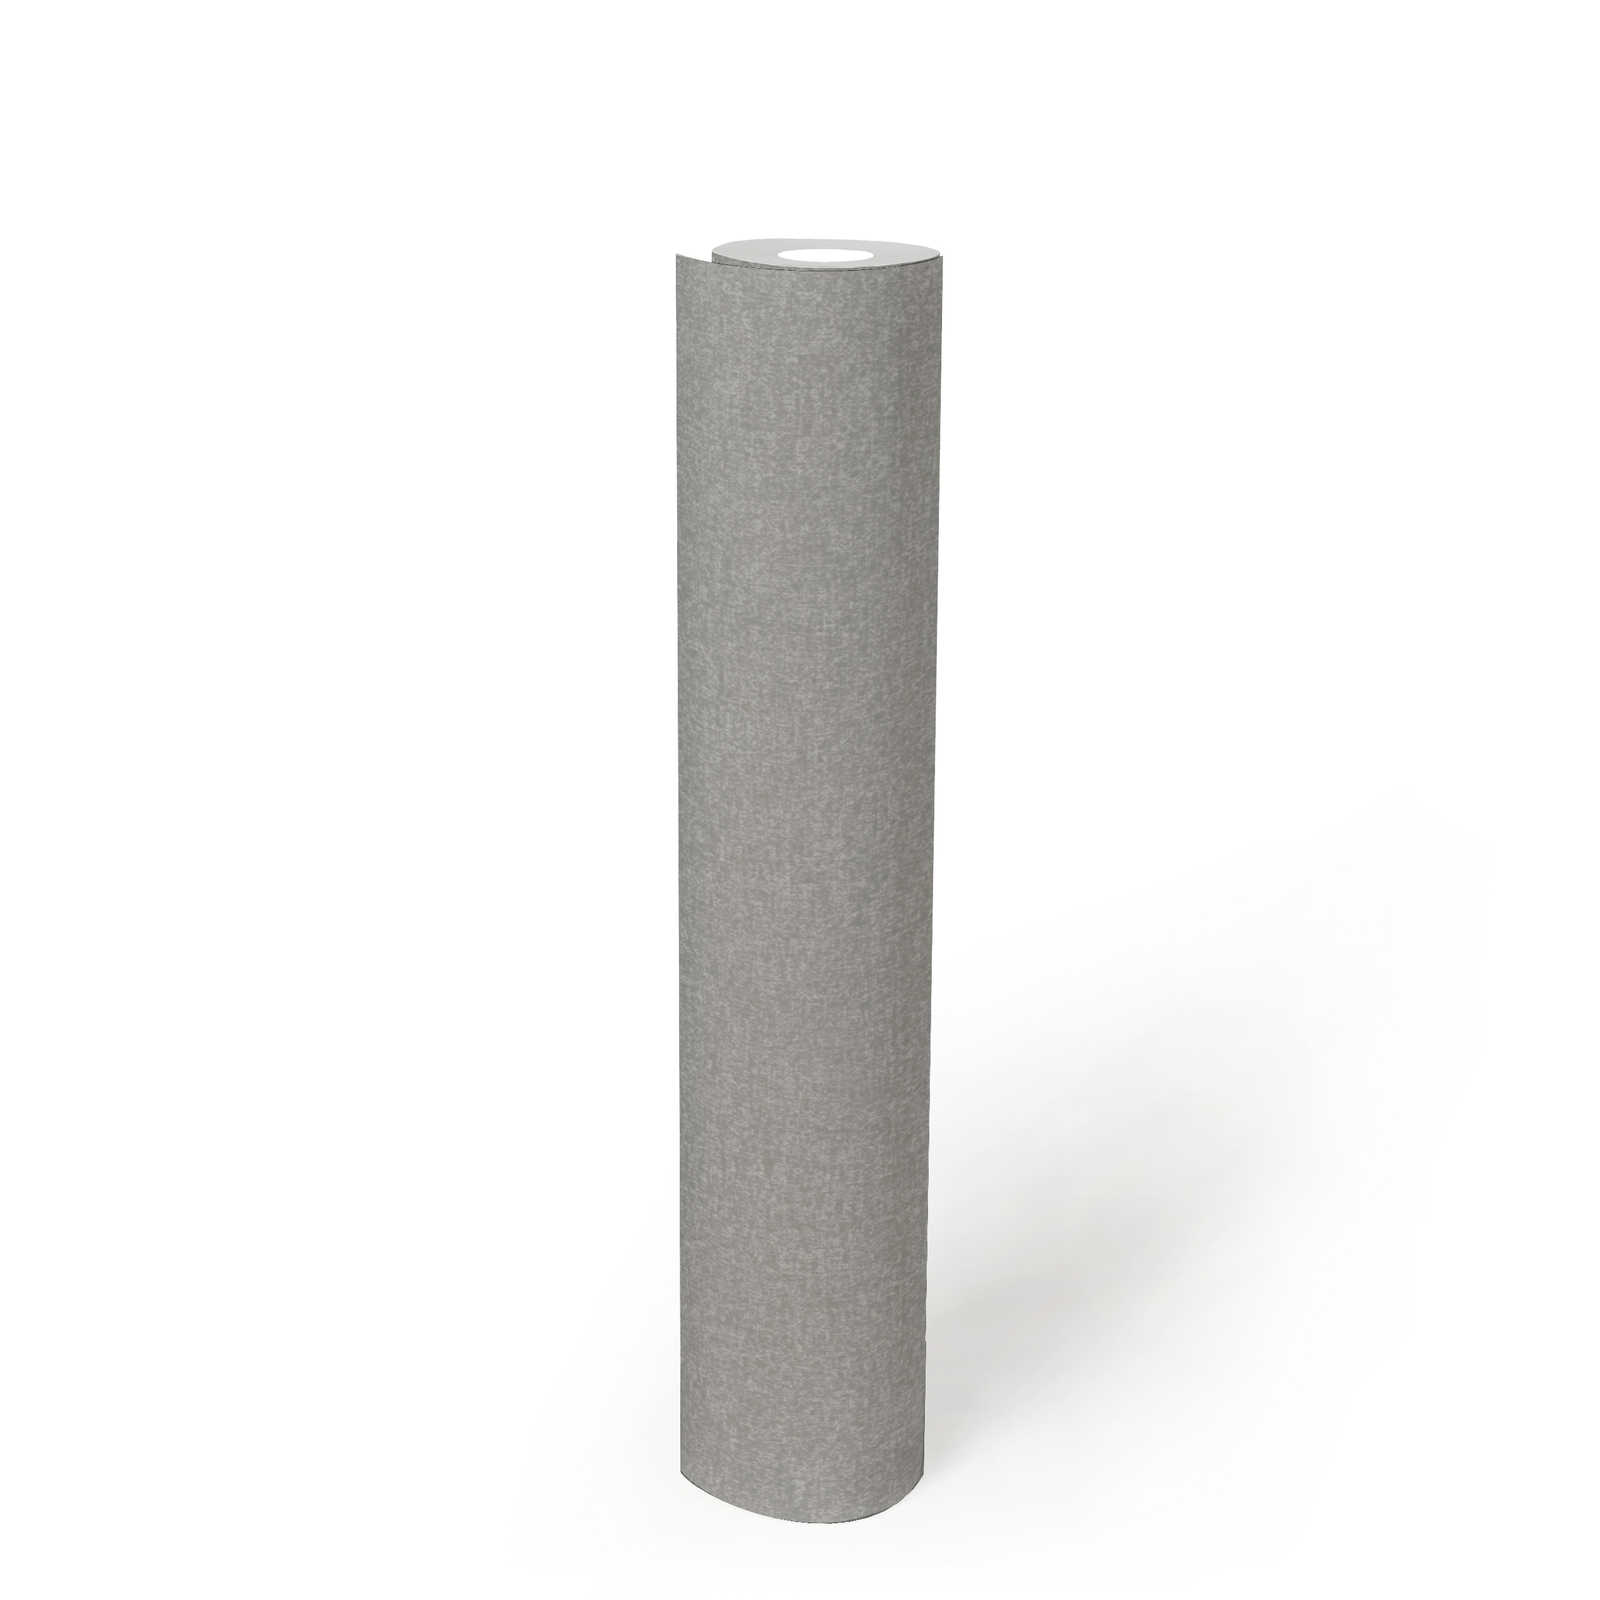             Non-woven wallpaper plain with light textured pattern - grey
        